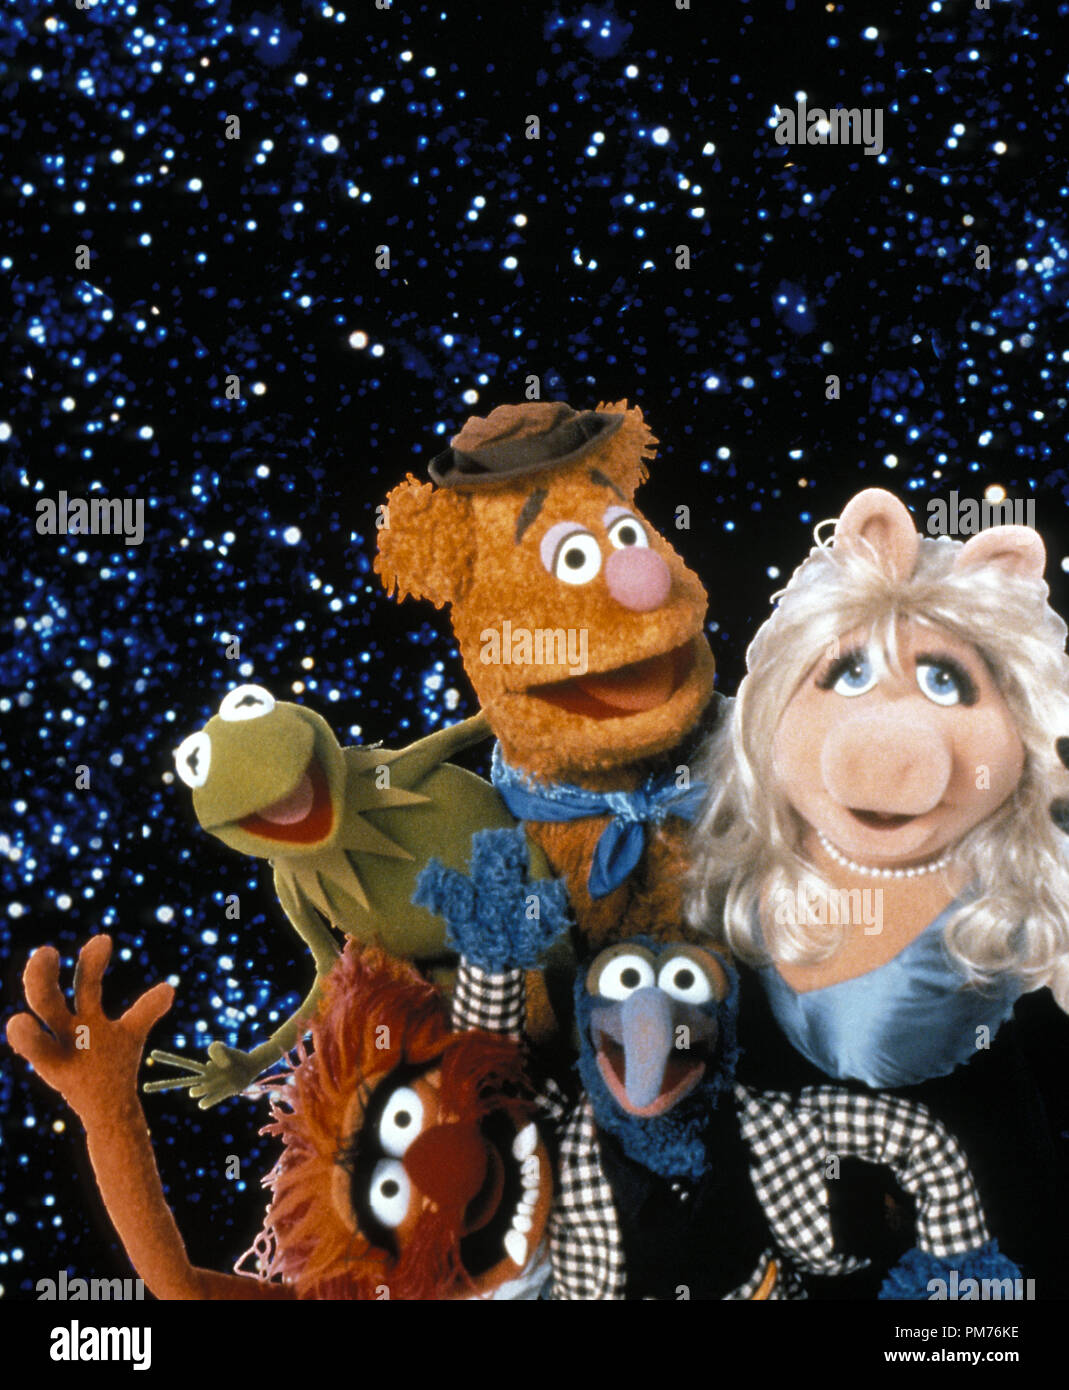 Film Still / Publicity Still from 'Muppets from Space' Animal, Kermit the Frog, Fozzie Bear, Gonzo, Miss Piggy © 1999 Columbia Pictures Photo Credit: James Bridges    File Reference # 30973437THA  For Editorial Use Only -  All Rights Reserved Stock Photo